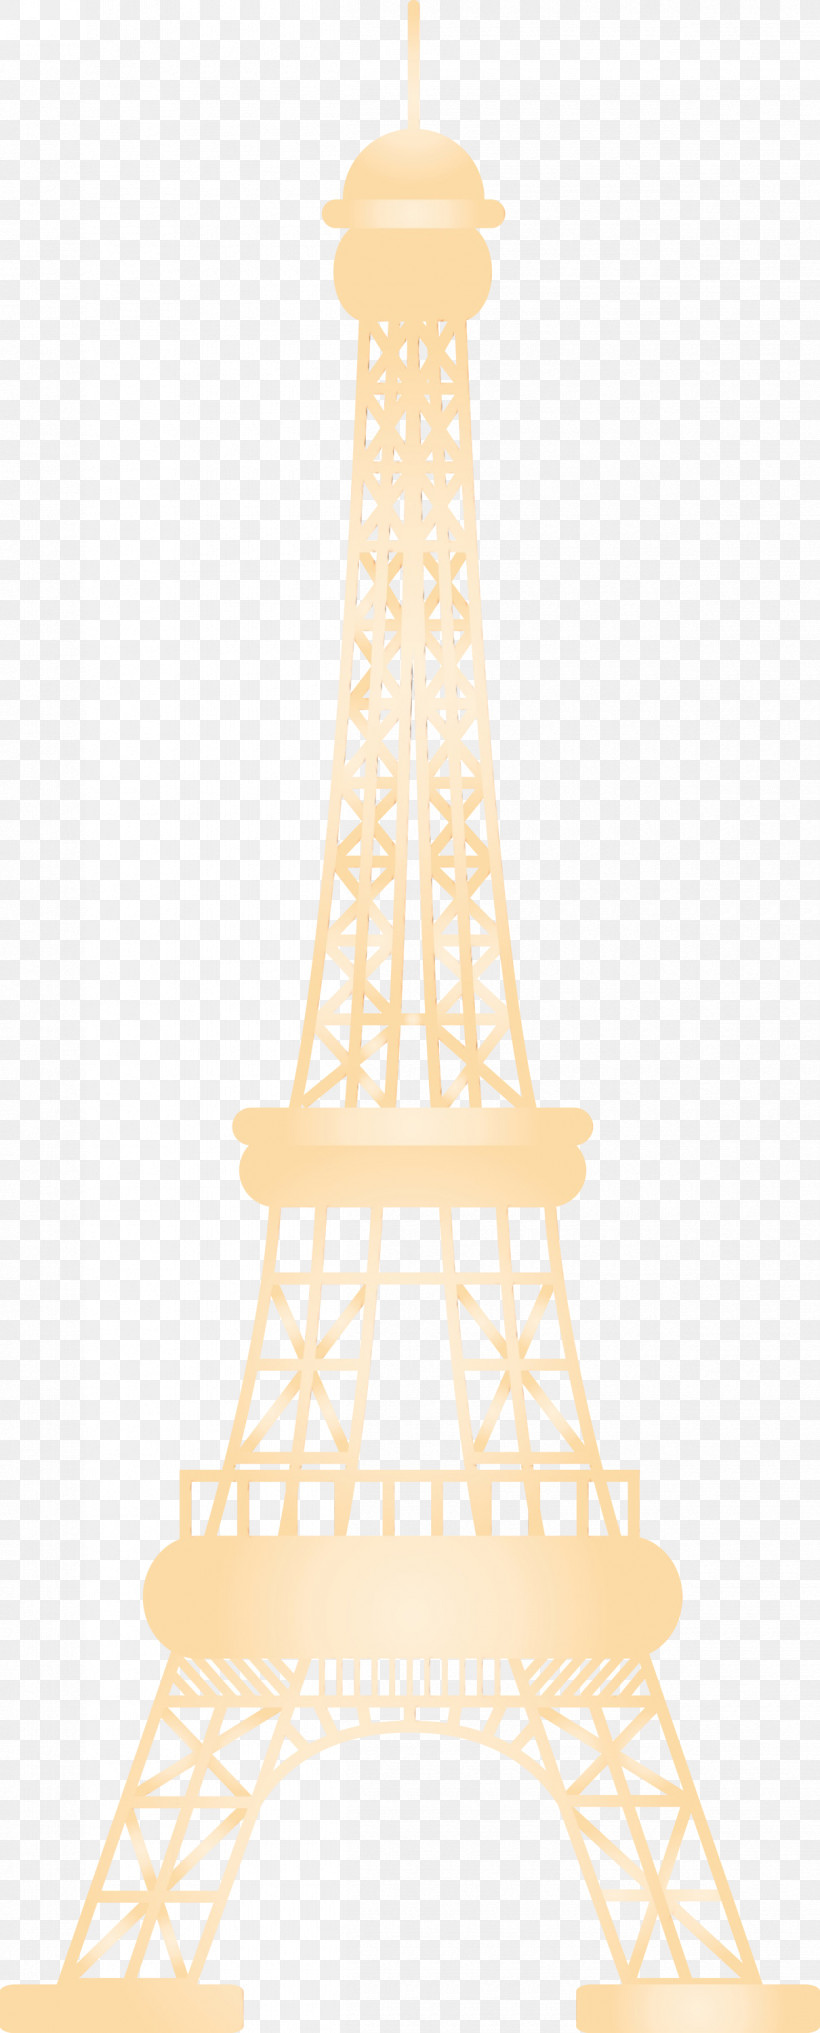 Klcc East Gate Tower Meter Font Tower, PNG, 1210x3000px, Watercolor, Klcc East Gate Tower, Meter, Paint, Tower Download Free